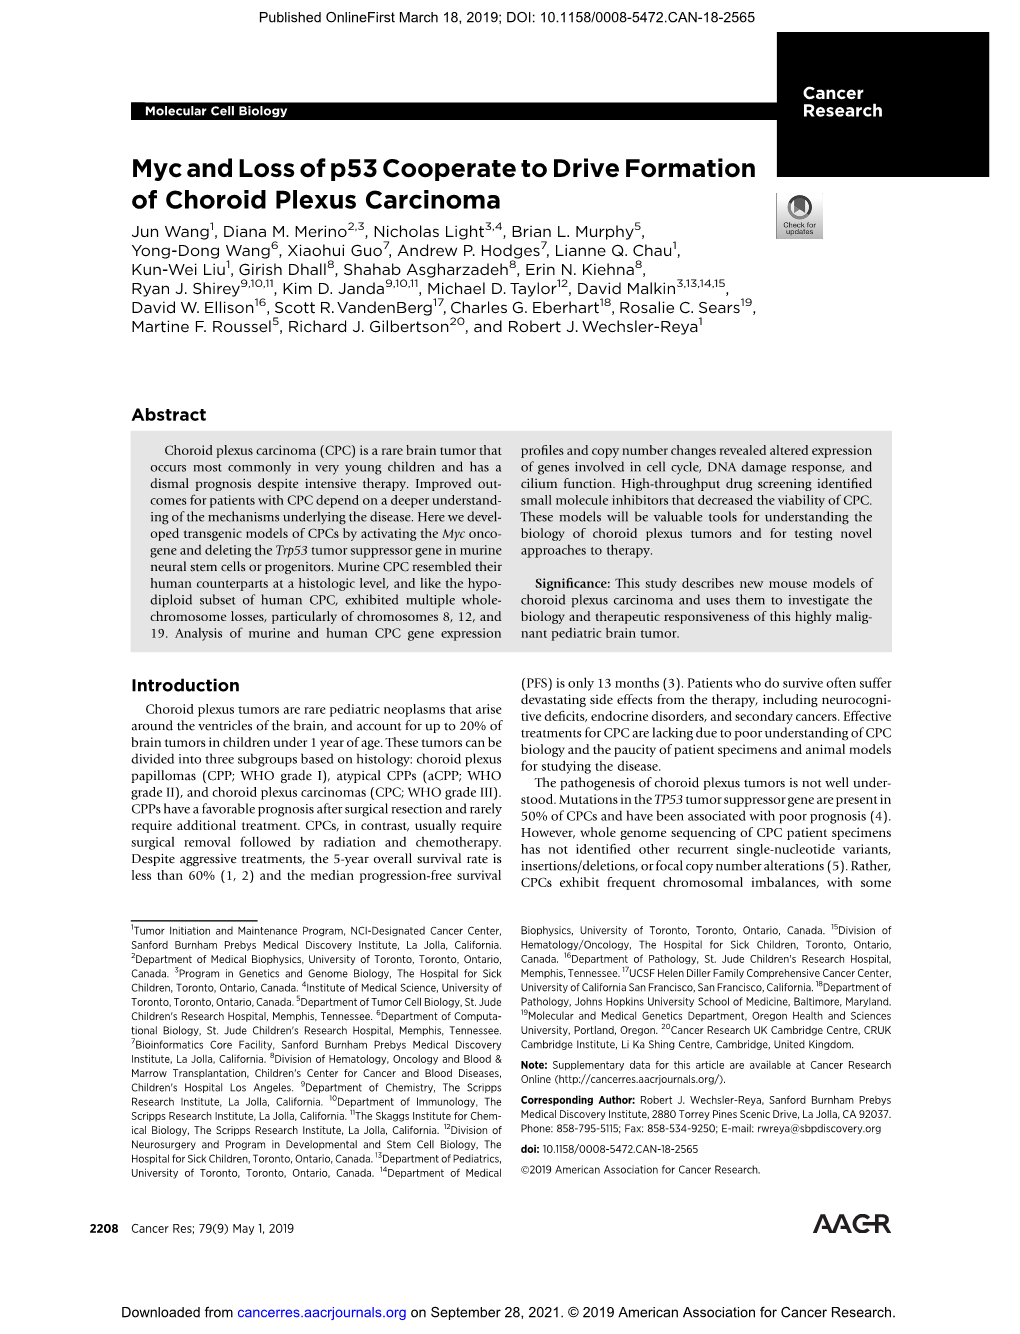 Myc and Loss of P53 Cooperate to Drive Formation of Choroid Plexus Carcinoma Jun Wang1, Diana M